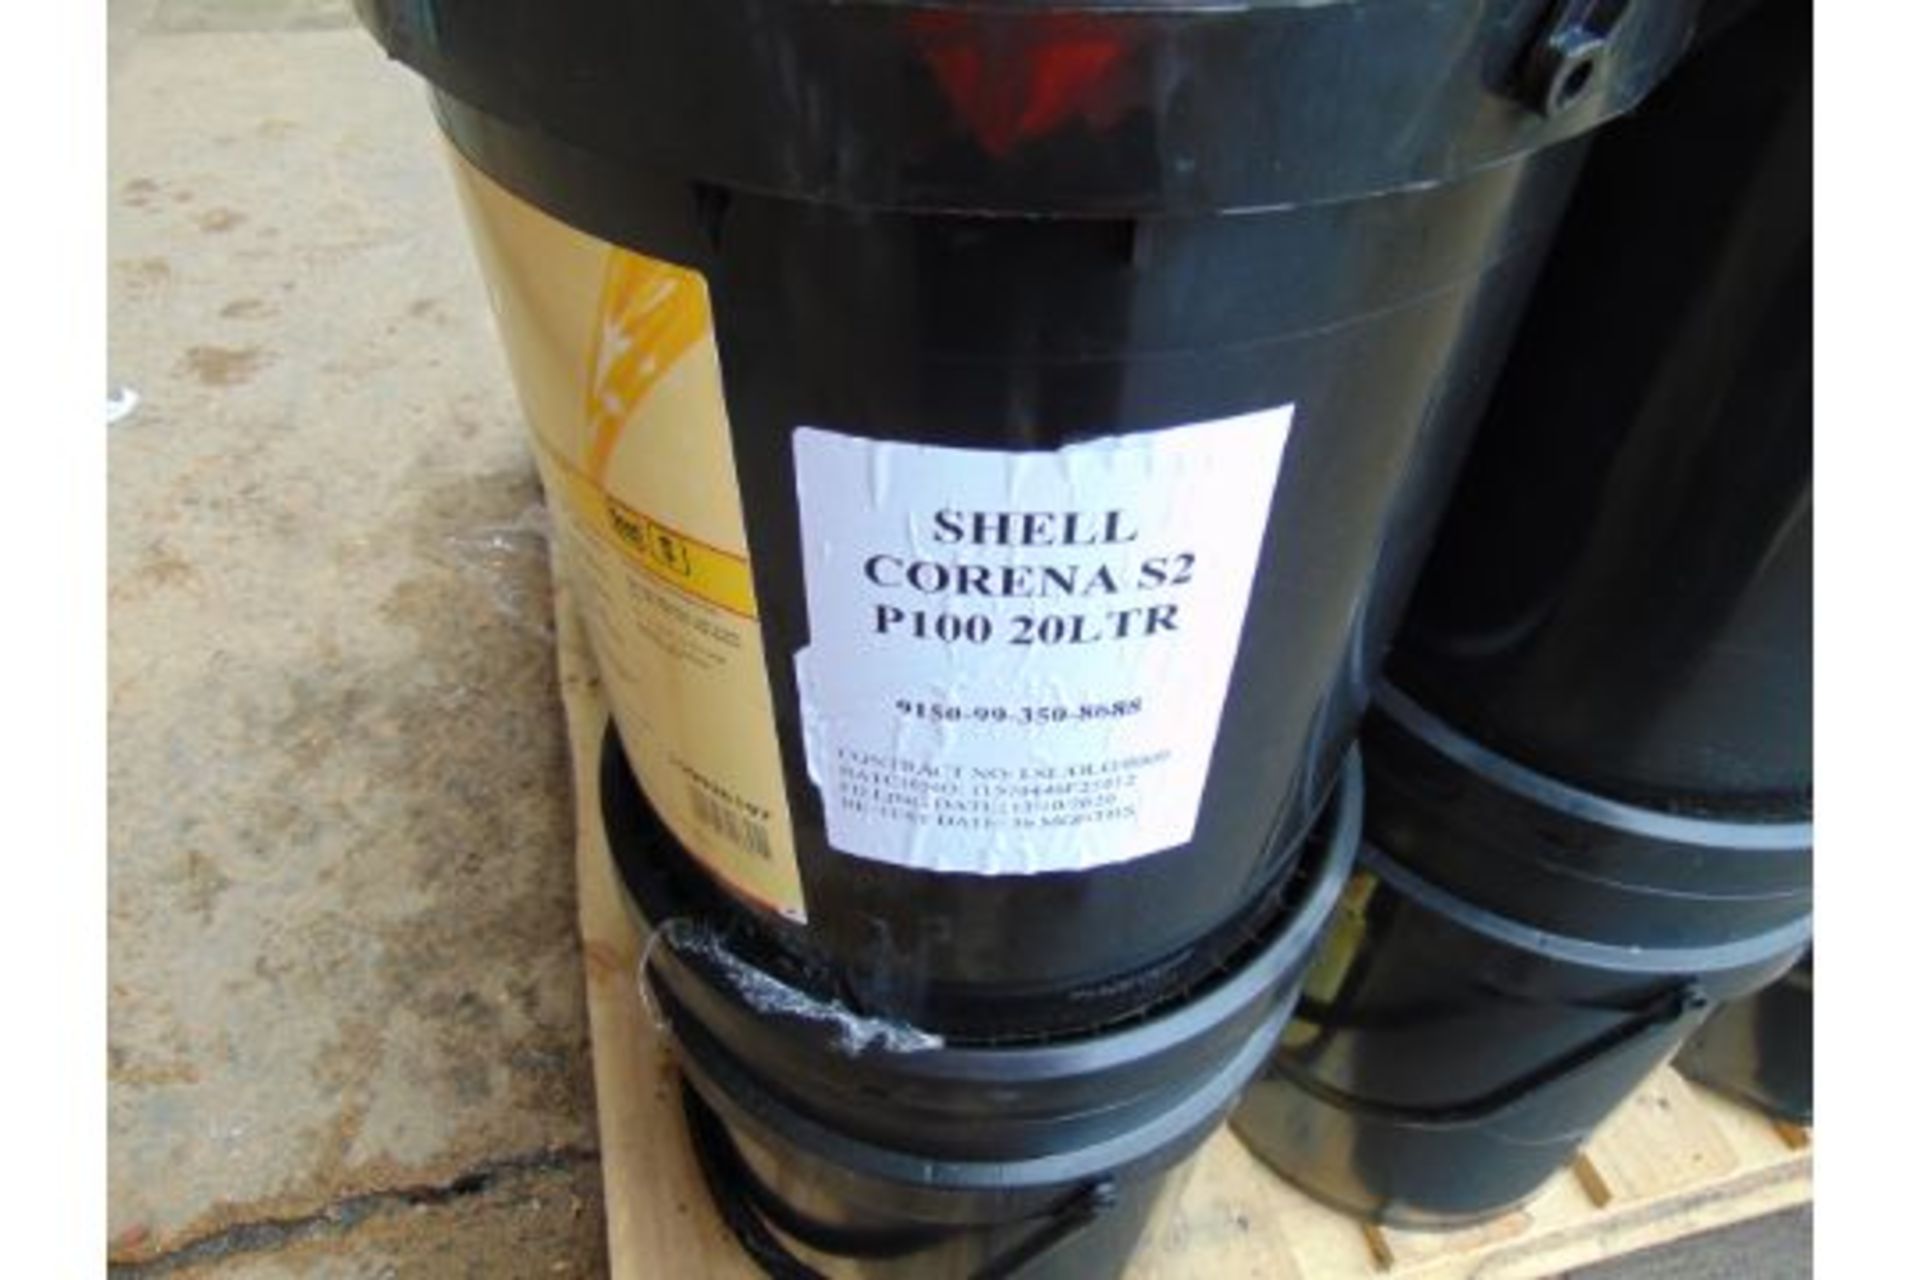 19 x 20 Litre Drums of Shell Corena S2 P100 High Quality Lubricating Oil - Image 3 of 5